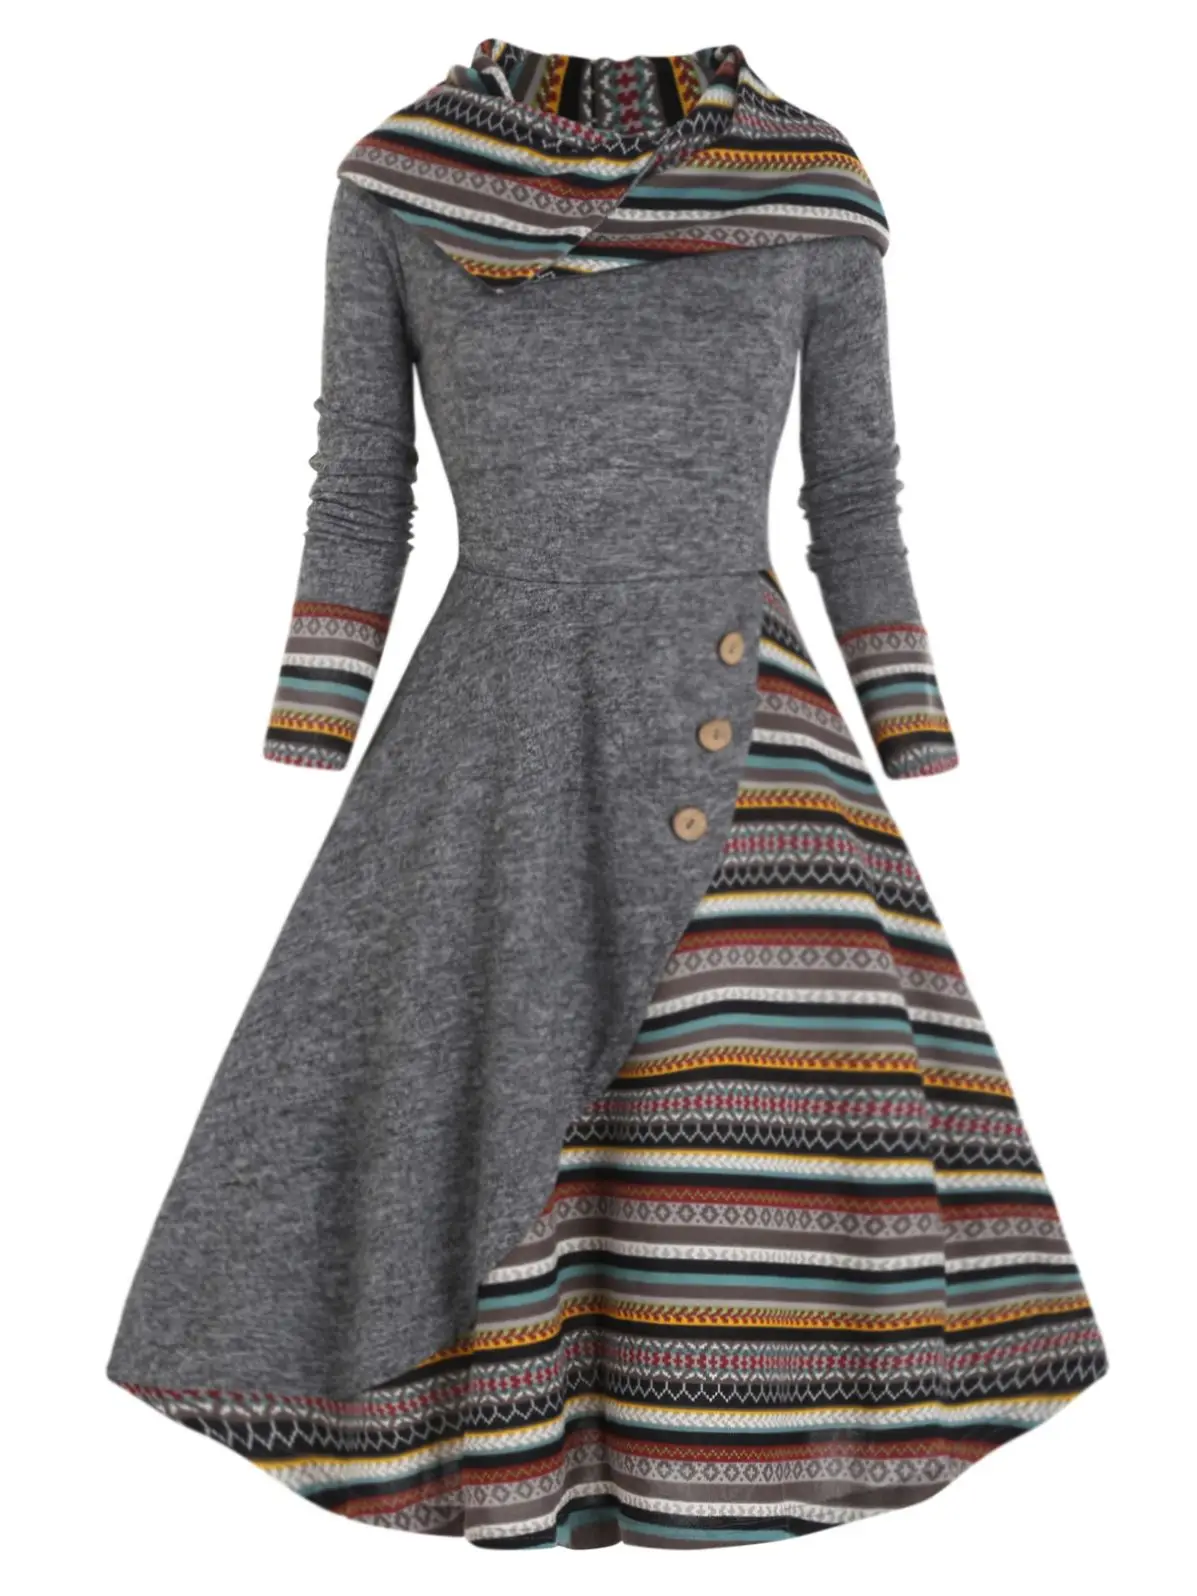 

Tribal Printed Hooded Dress Autumn Colorful Stripe Panel Knit Dress Mock Button Winter Long Sleeve Dress with Hoodies